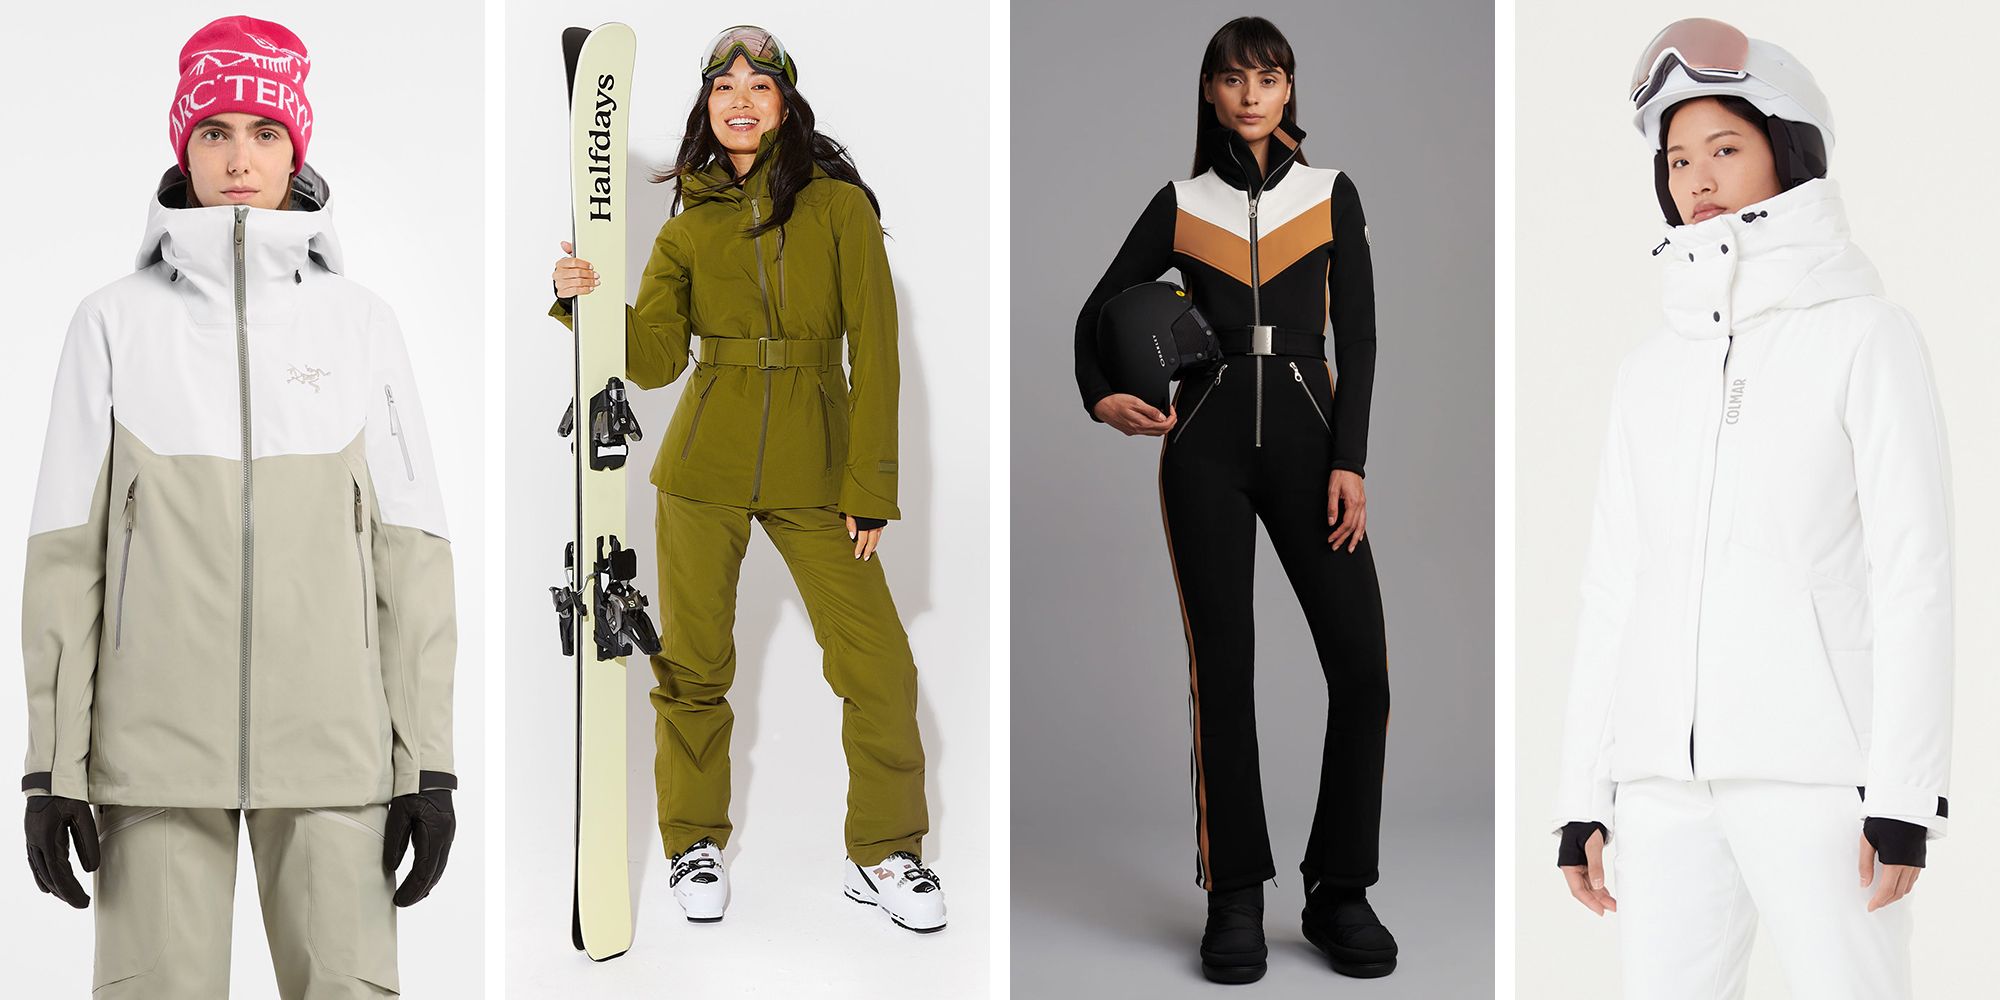 The 23 Best Women's Ski Suits to Stay Warm (and Chic) on the Mountain